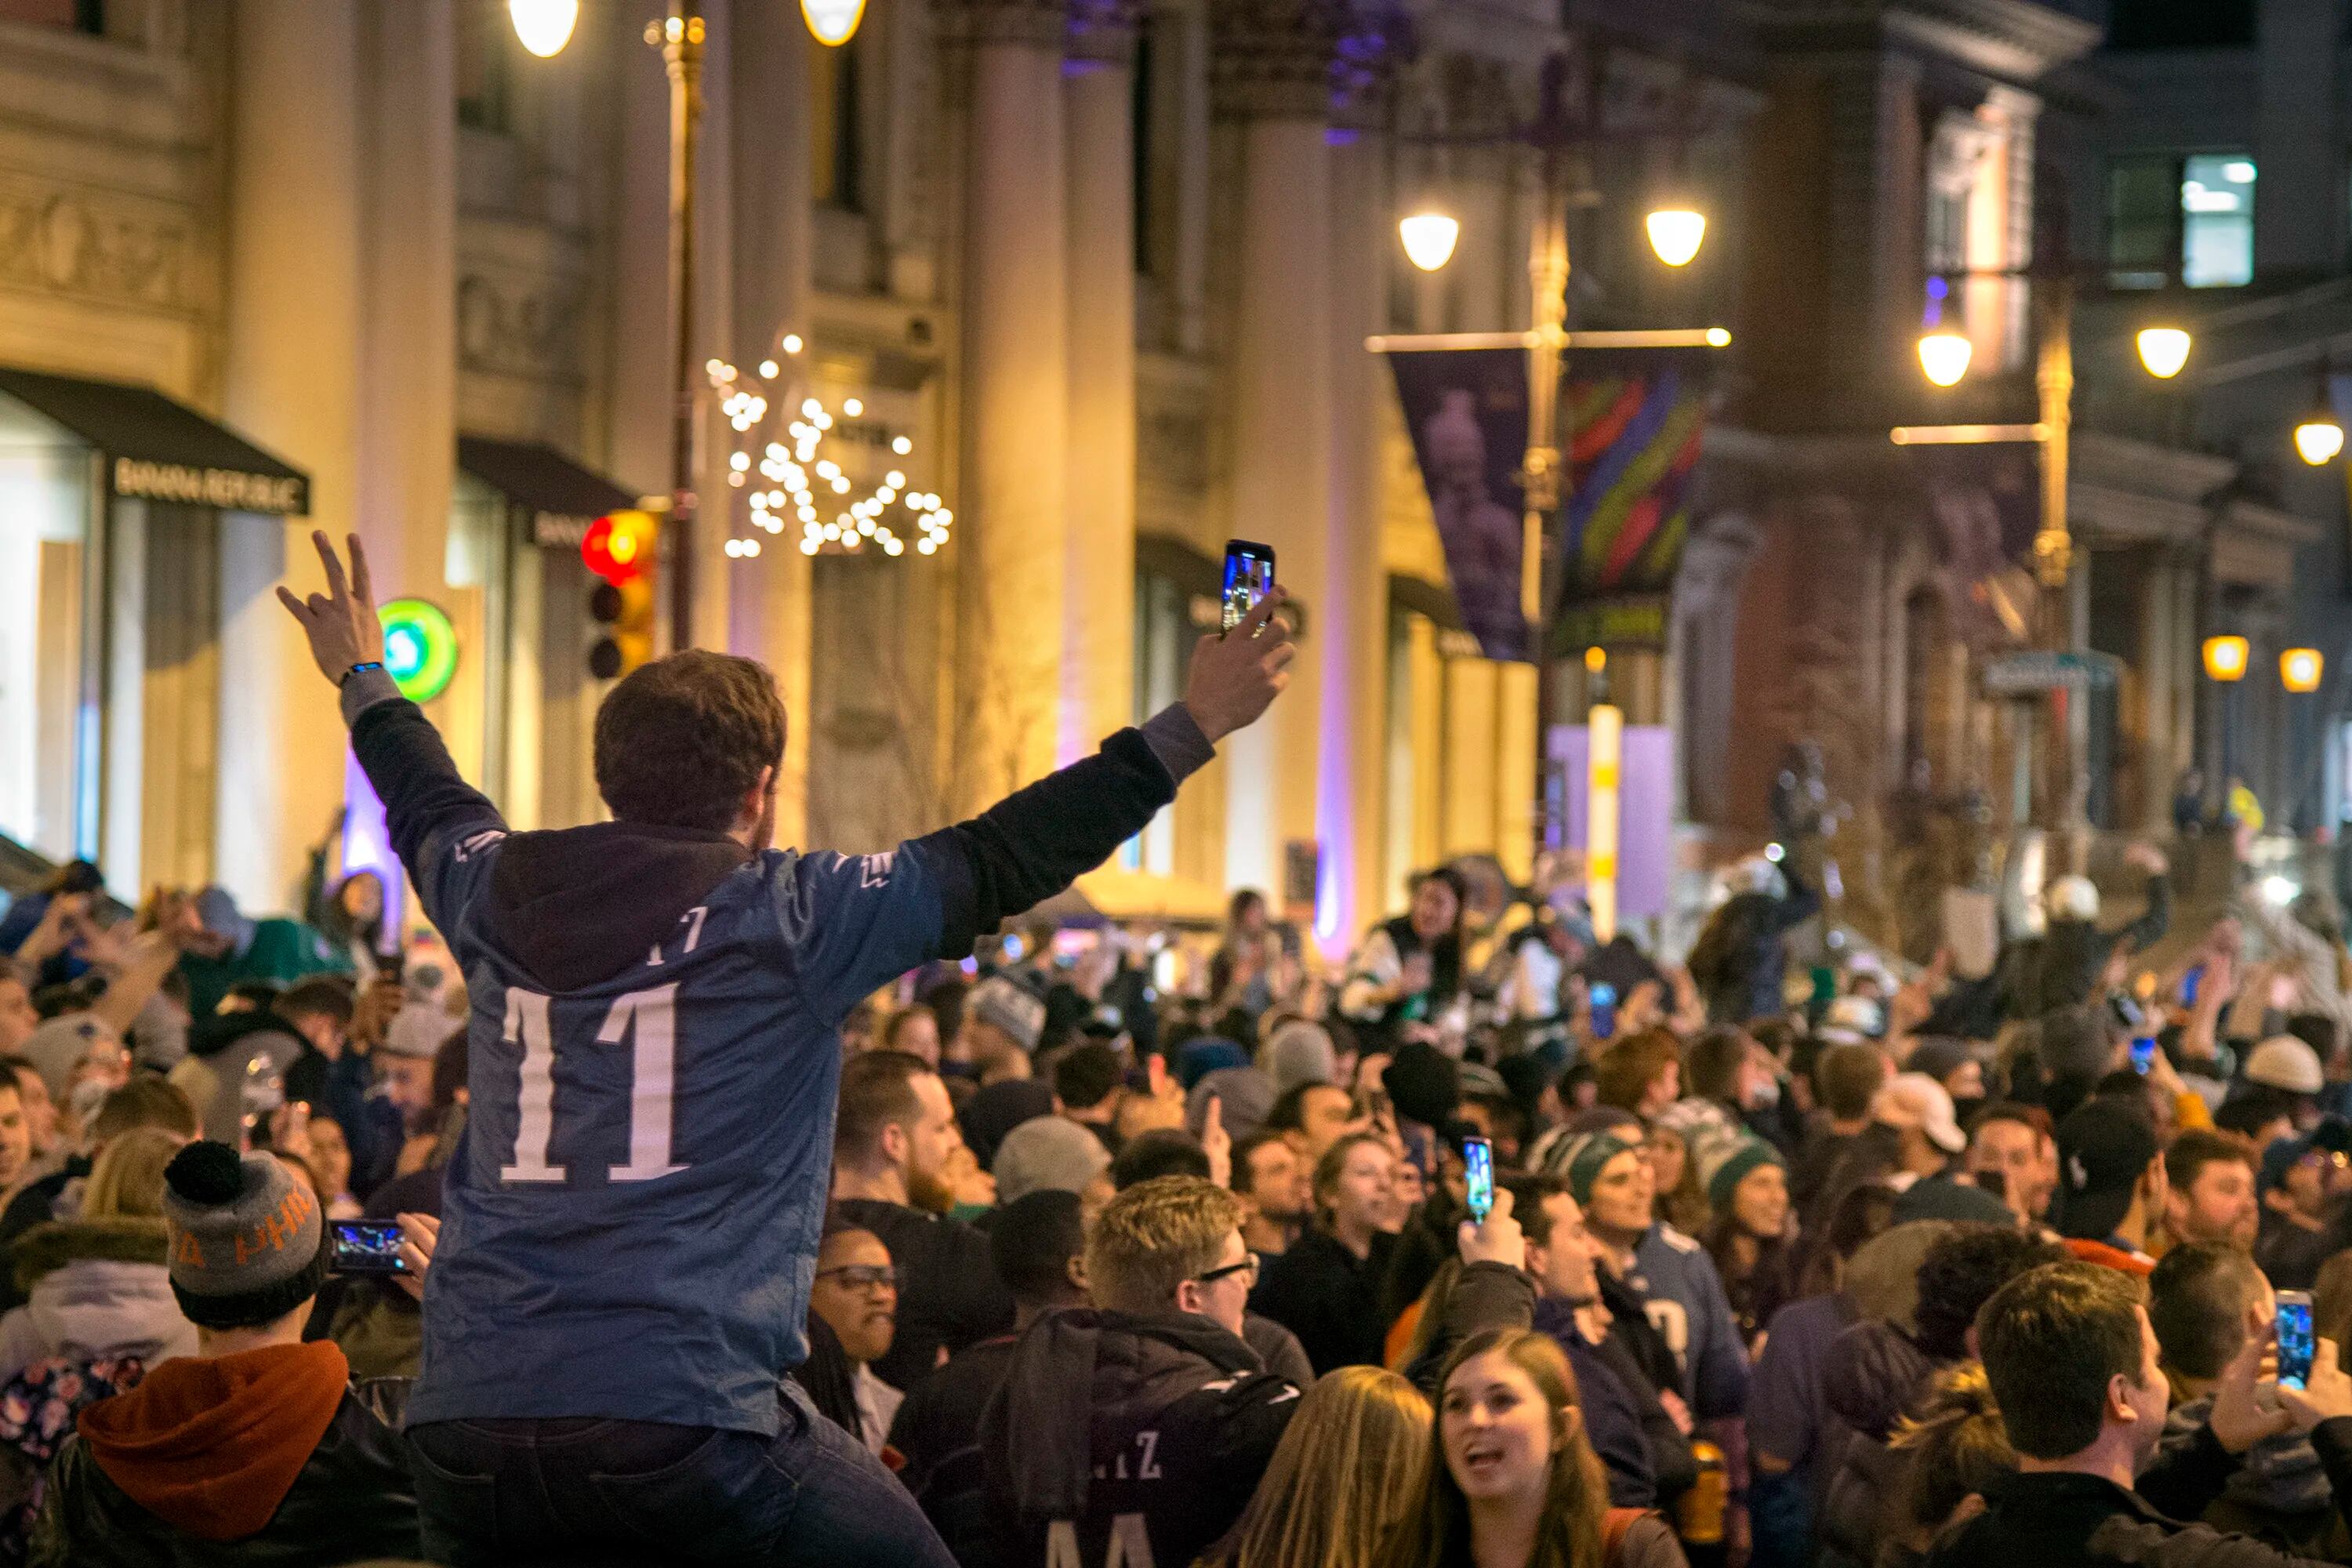 Rowdy fans take to streets after Philadelphia Eagles Super Bowl